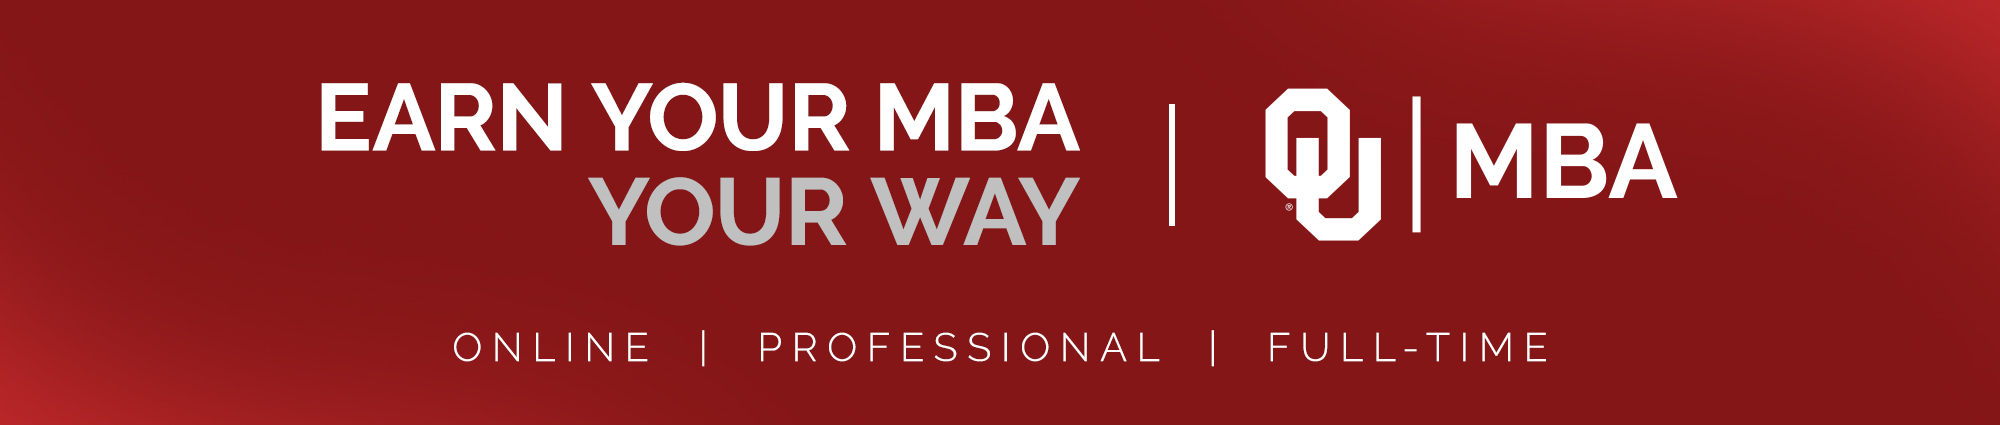 Earn Your MBA Your Way-Online, Full-Time, Professional